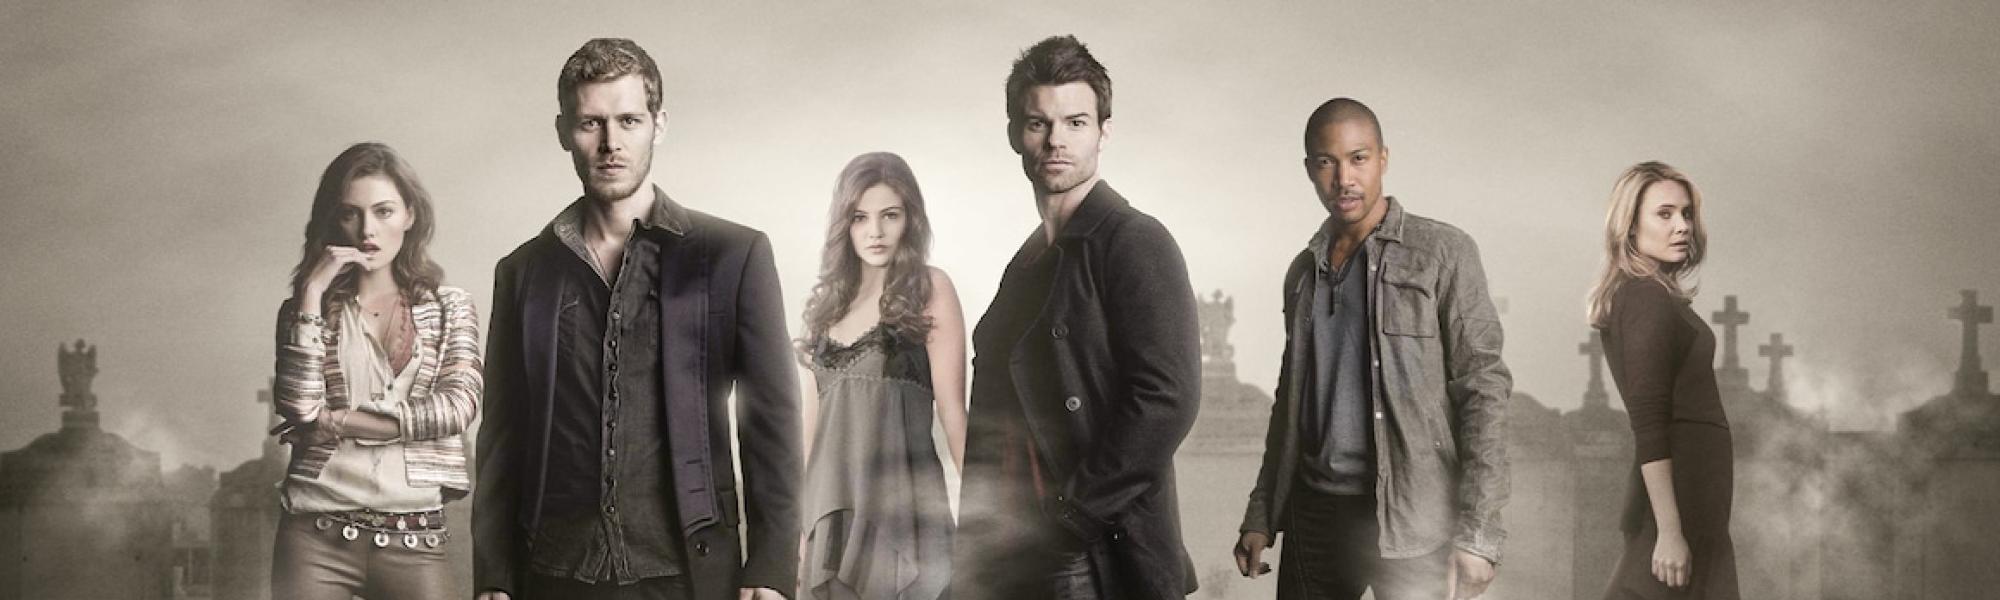 The Vampire Diaries spin-off The Originals comes to All 4